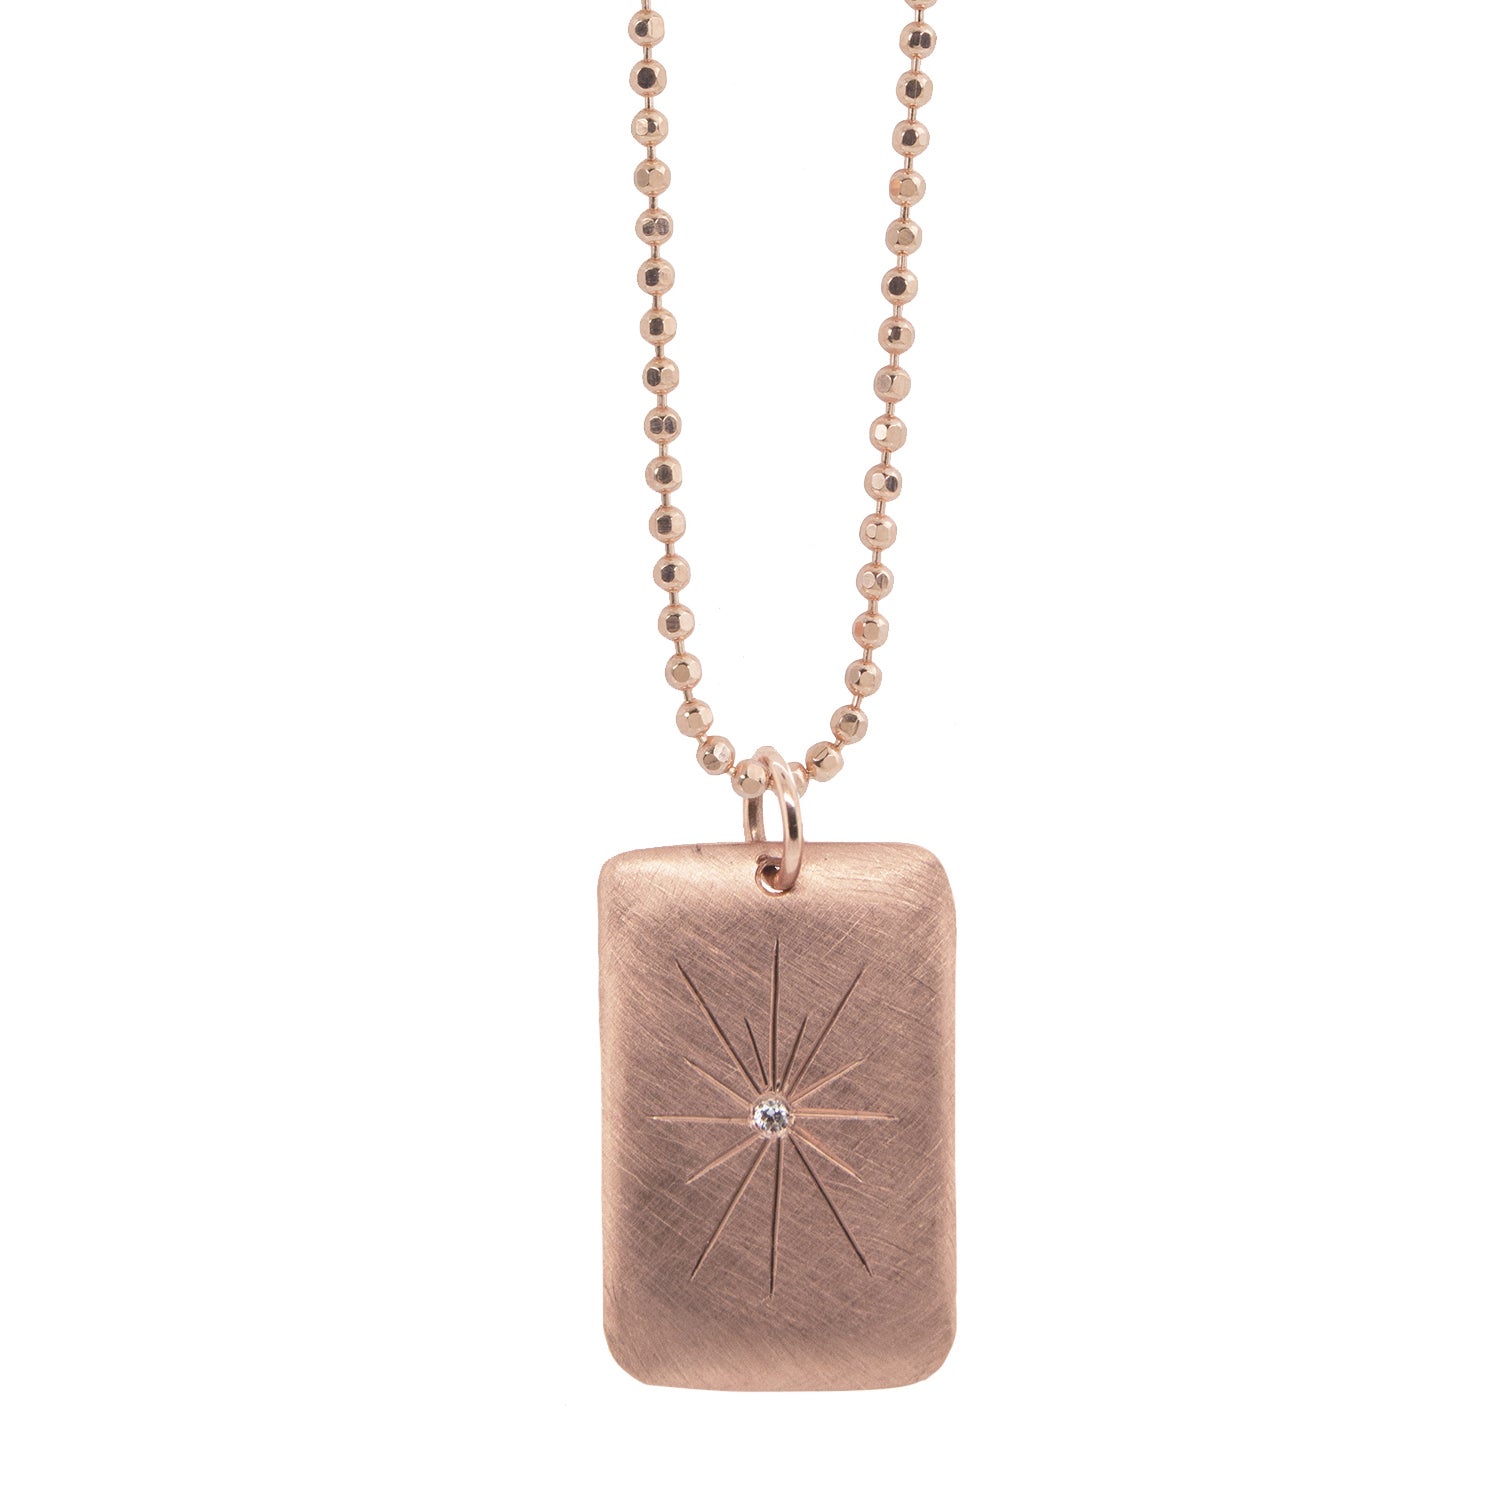 14k rose gold CALE pendant with hand etching and diamond